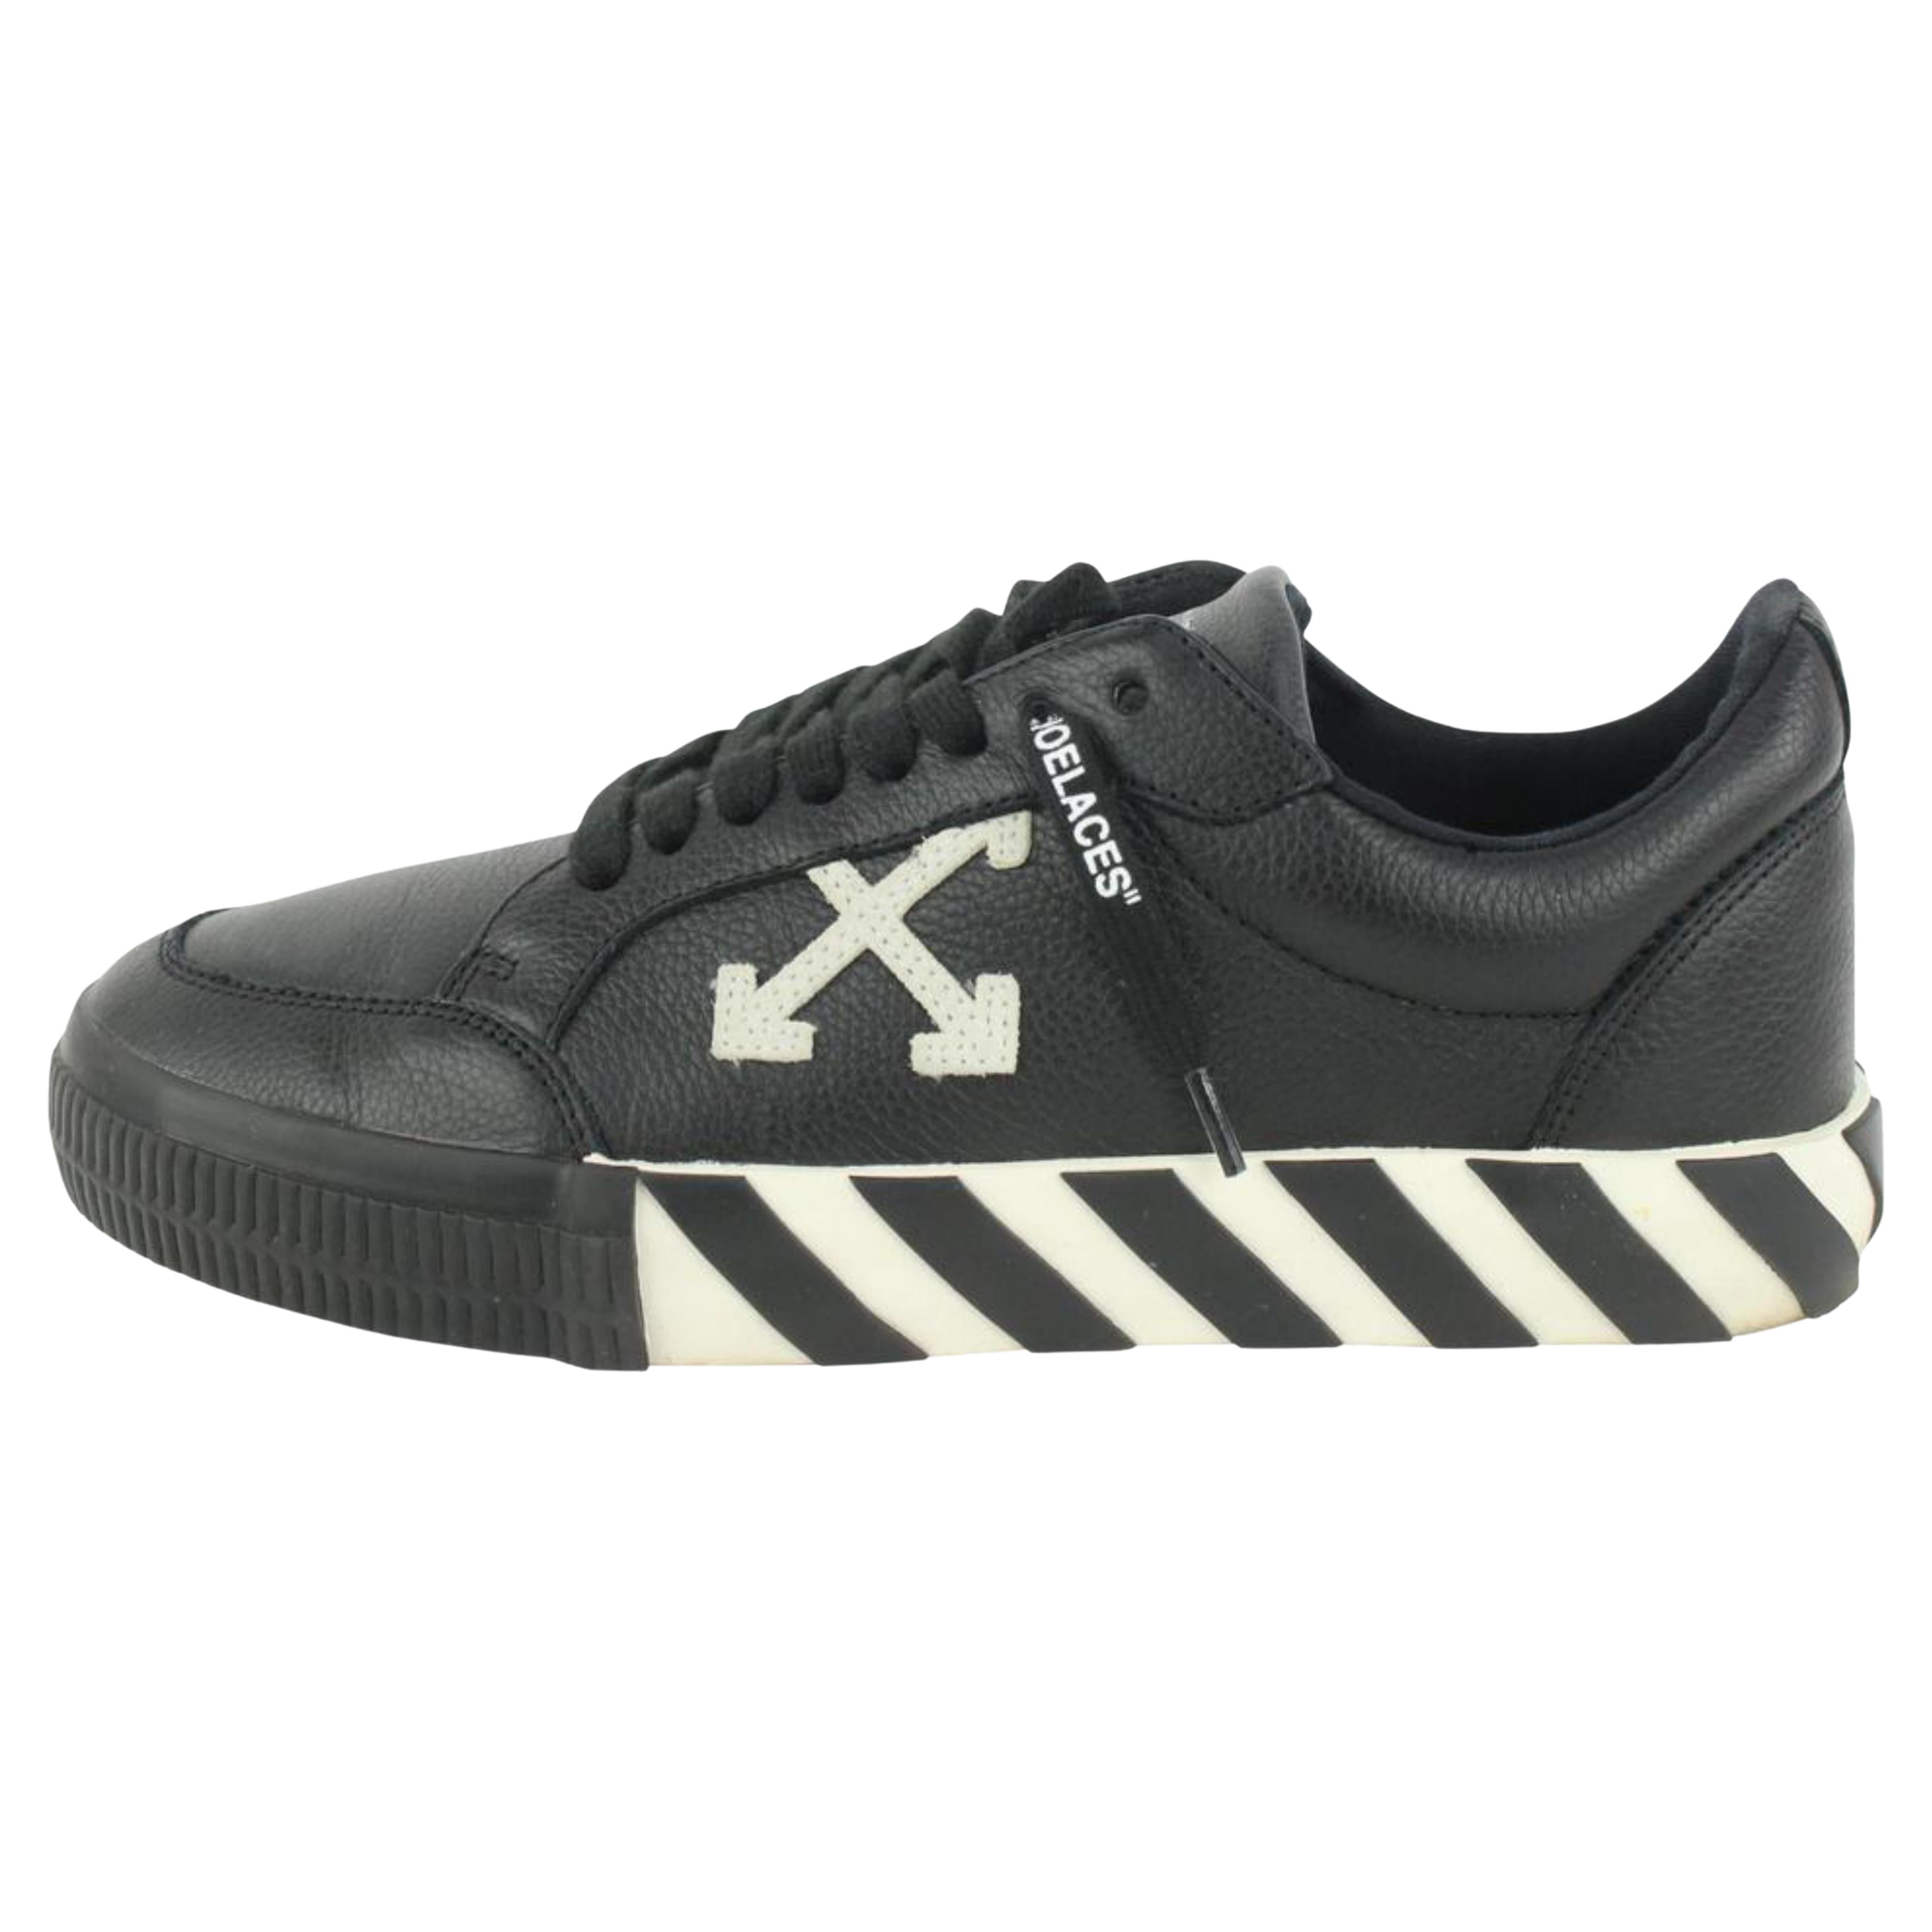 Off-White Men Do You Cheer" Black Low Sneakers 1029of44 For Sale